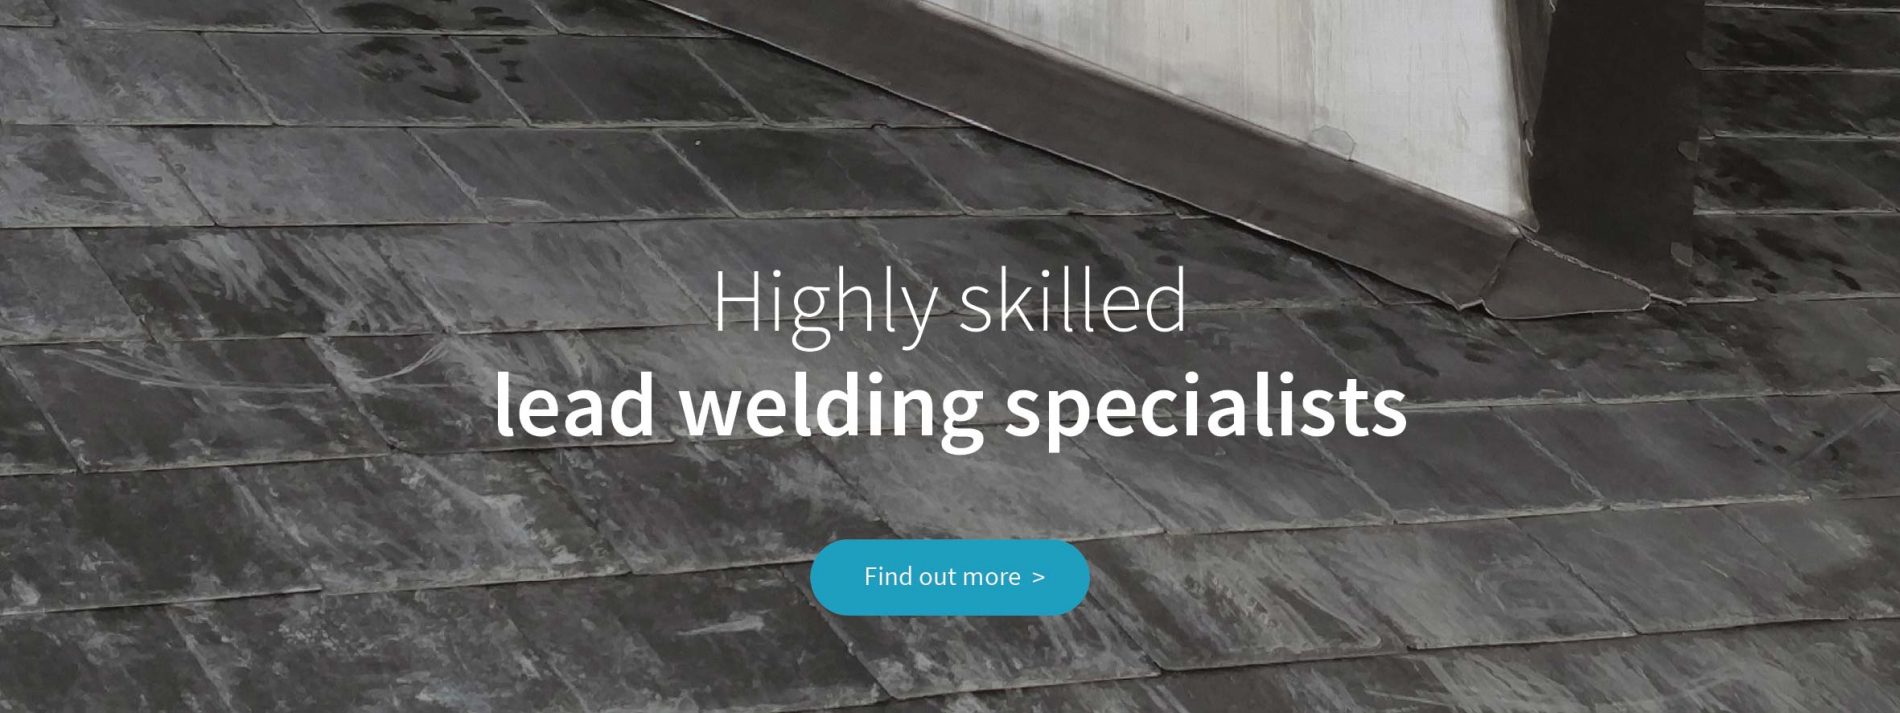 Highly skilled lead welding specialists